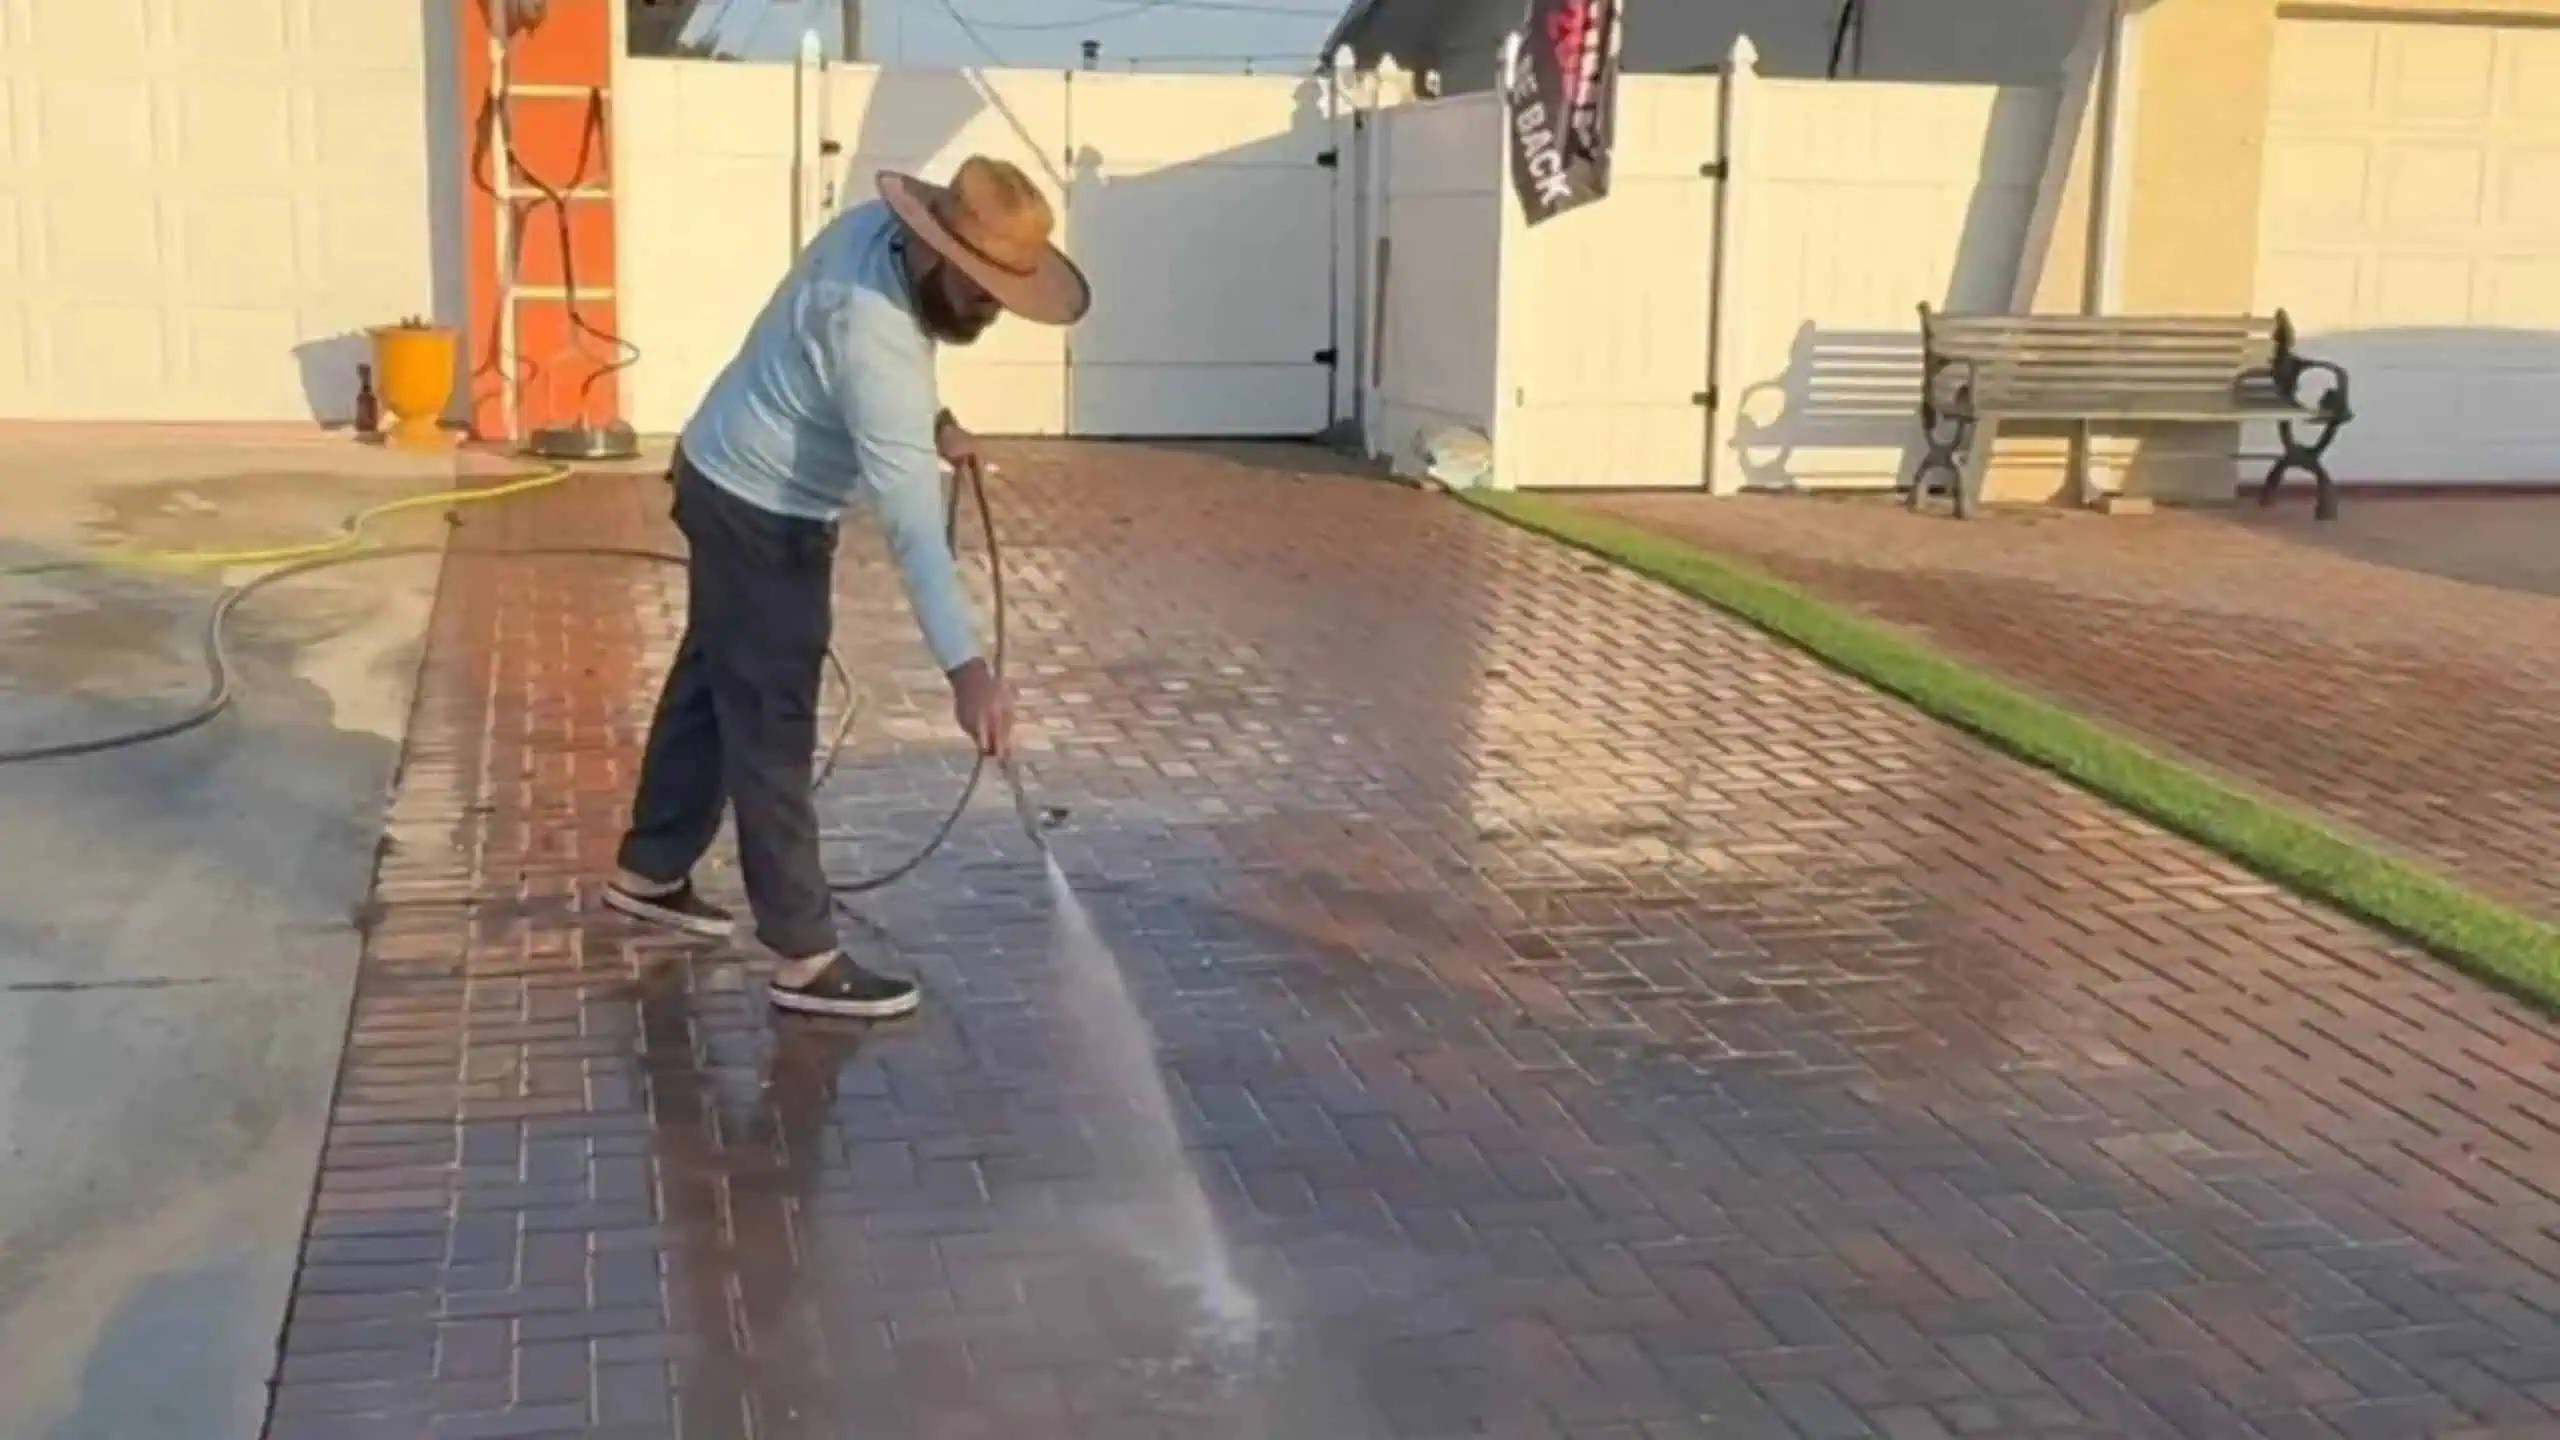 "a man providing paver sealing services using a pressure washer to clean pavers before sealing the surface"